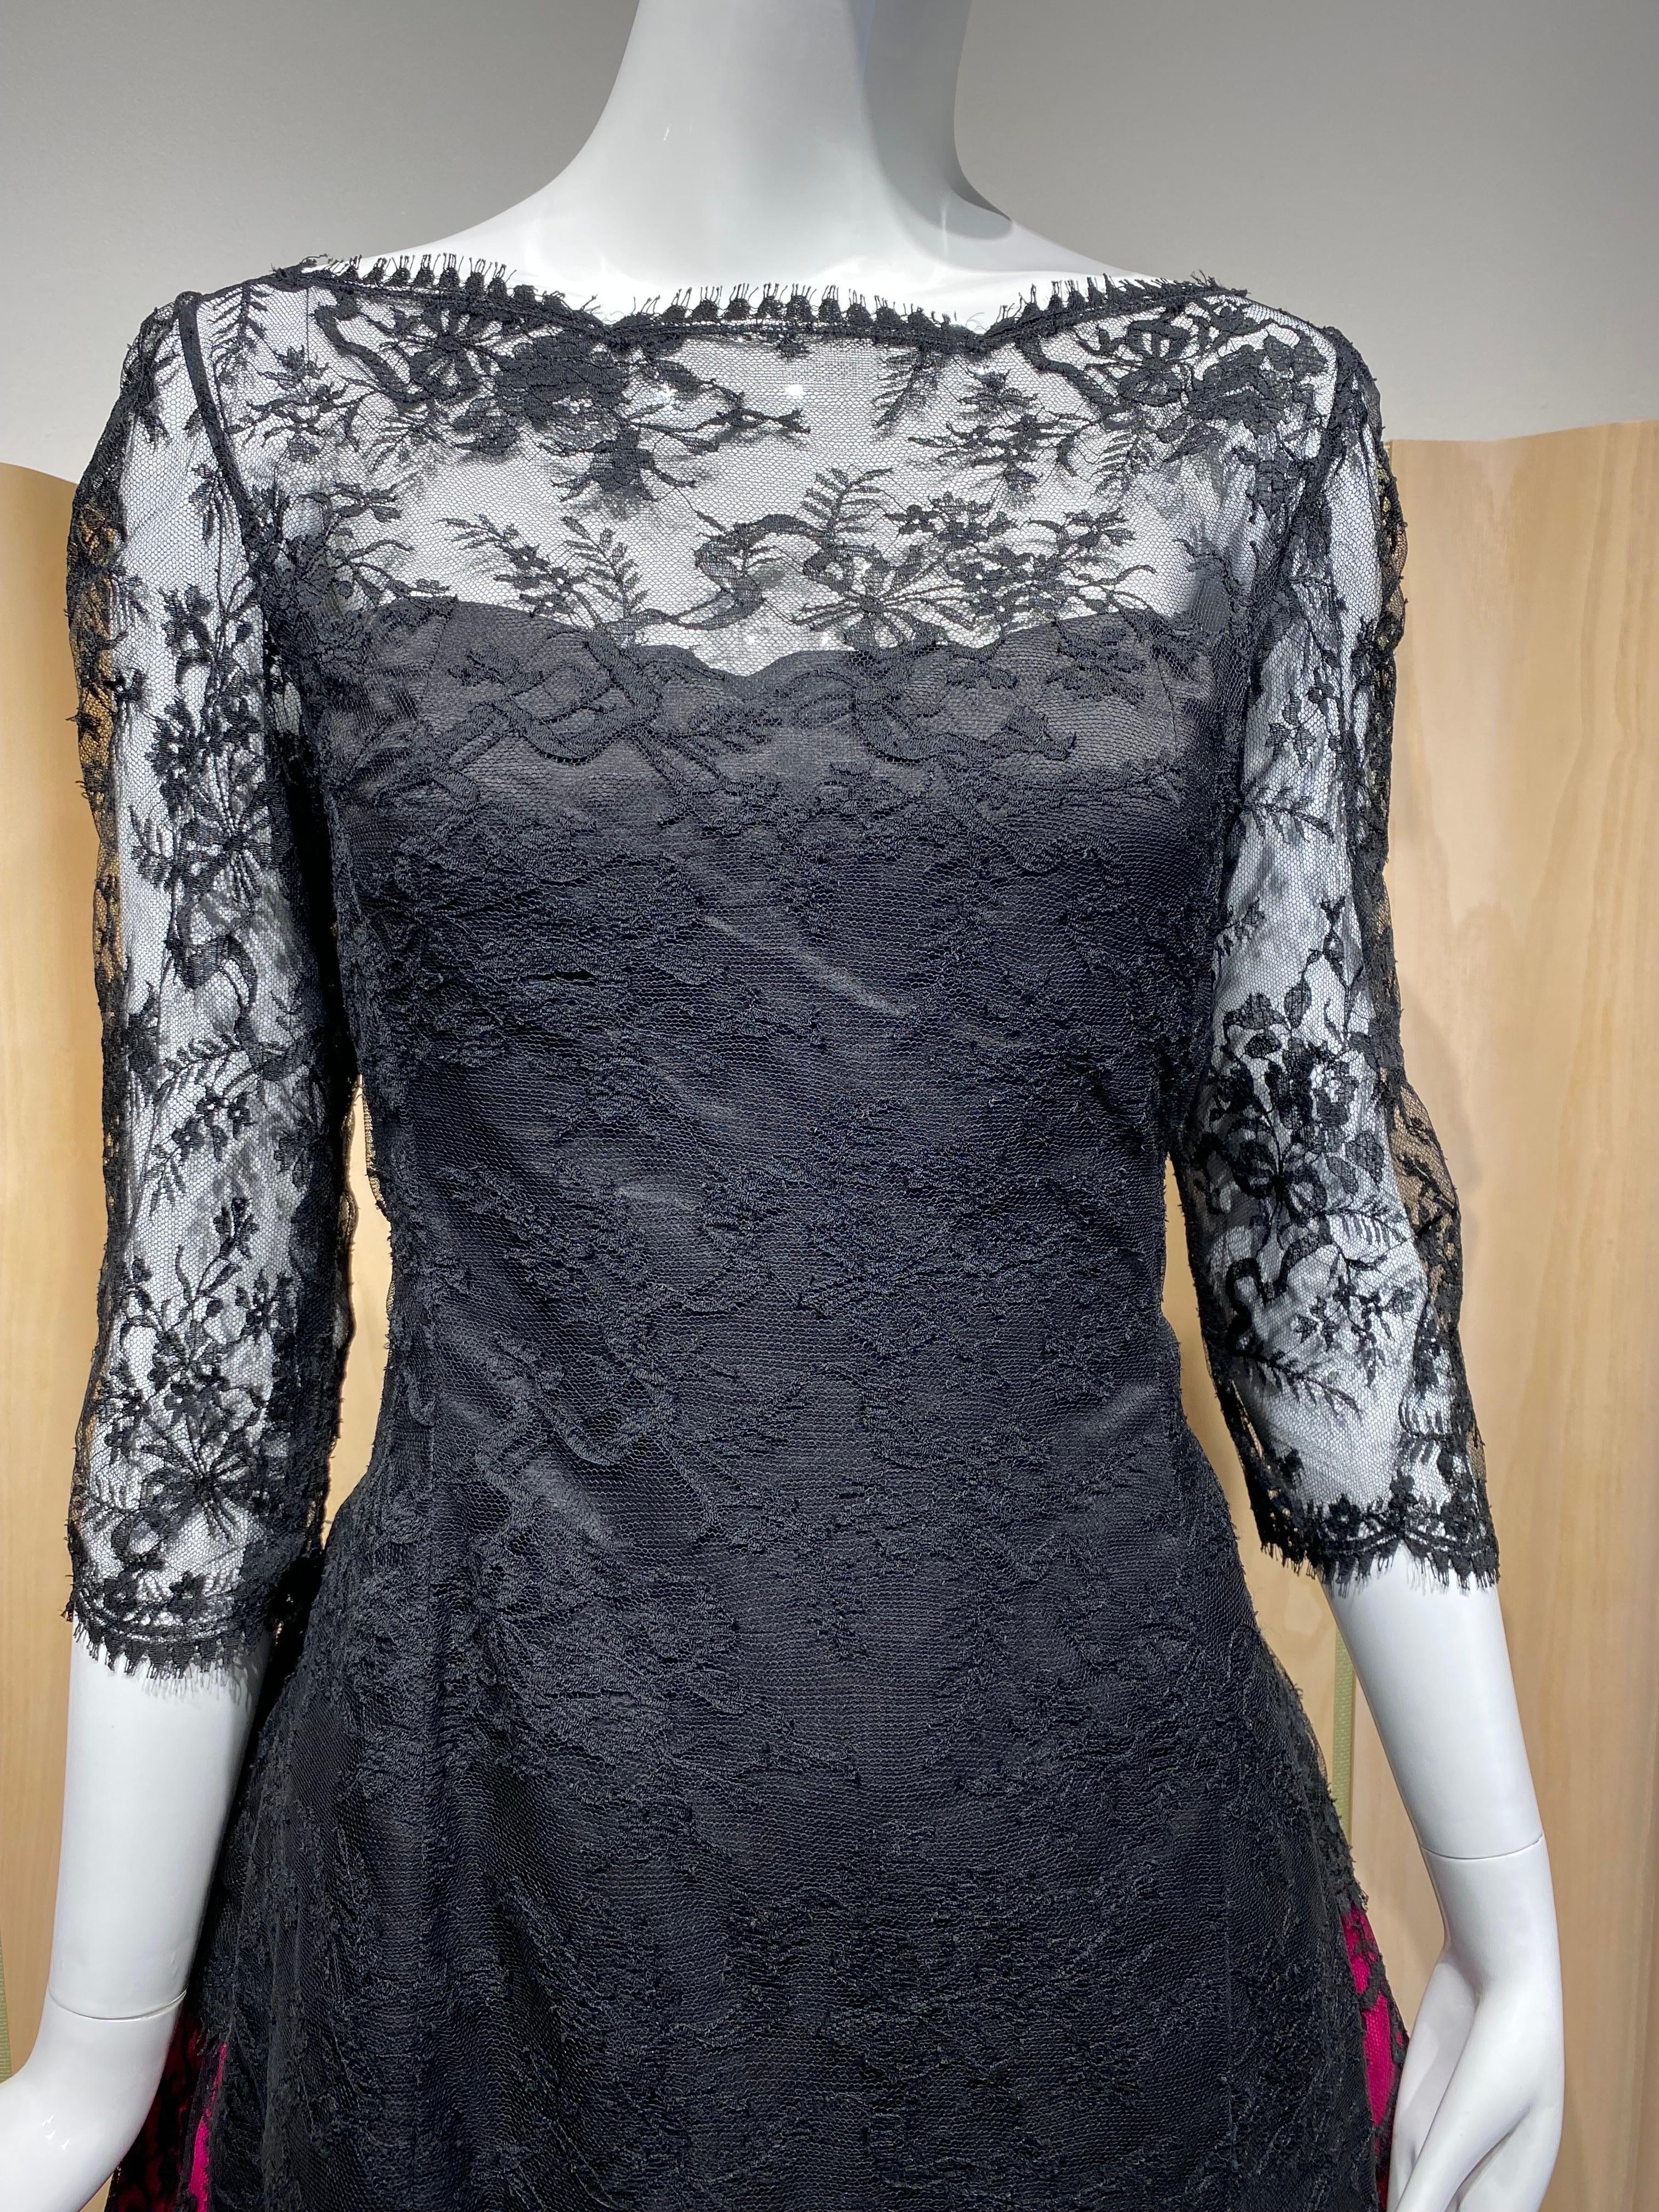 Vintage Bill Blass Black Lace and Hot Pink Cocktail Dress For Sale 1